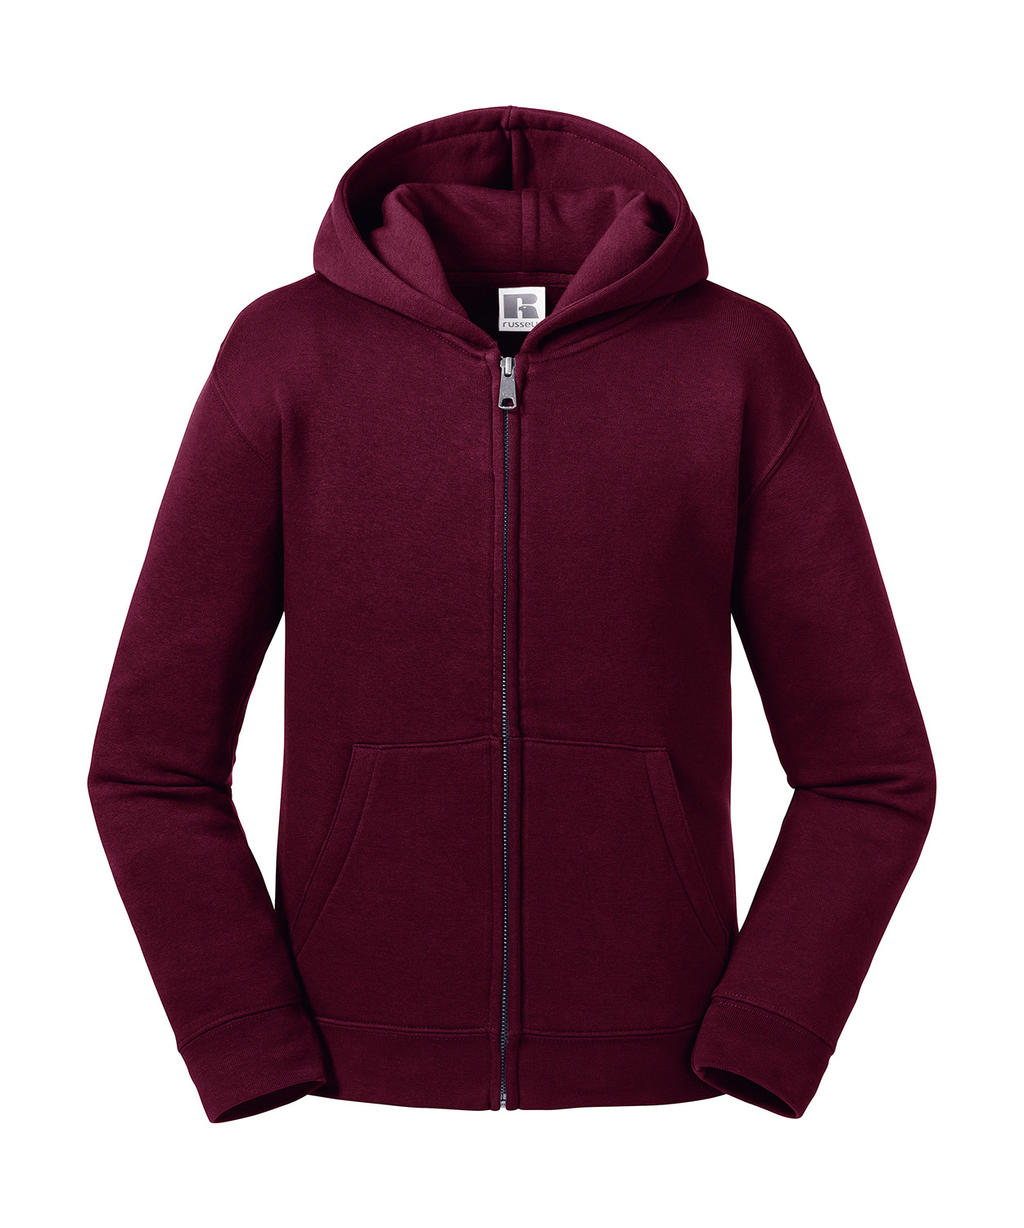  Kids Authentic Zipped Hood Sweat in Farbe Burgundy